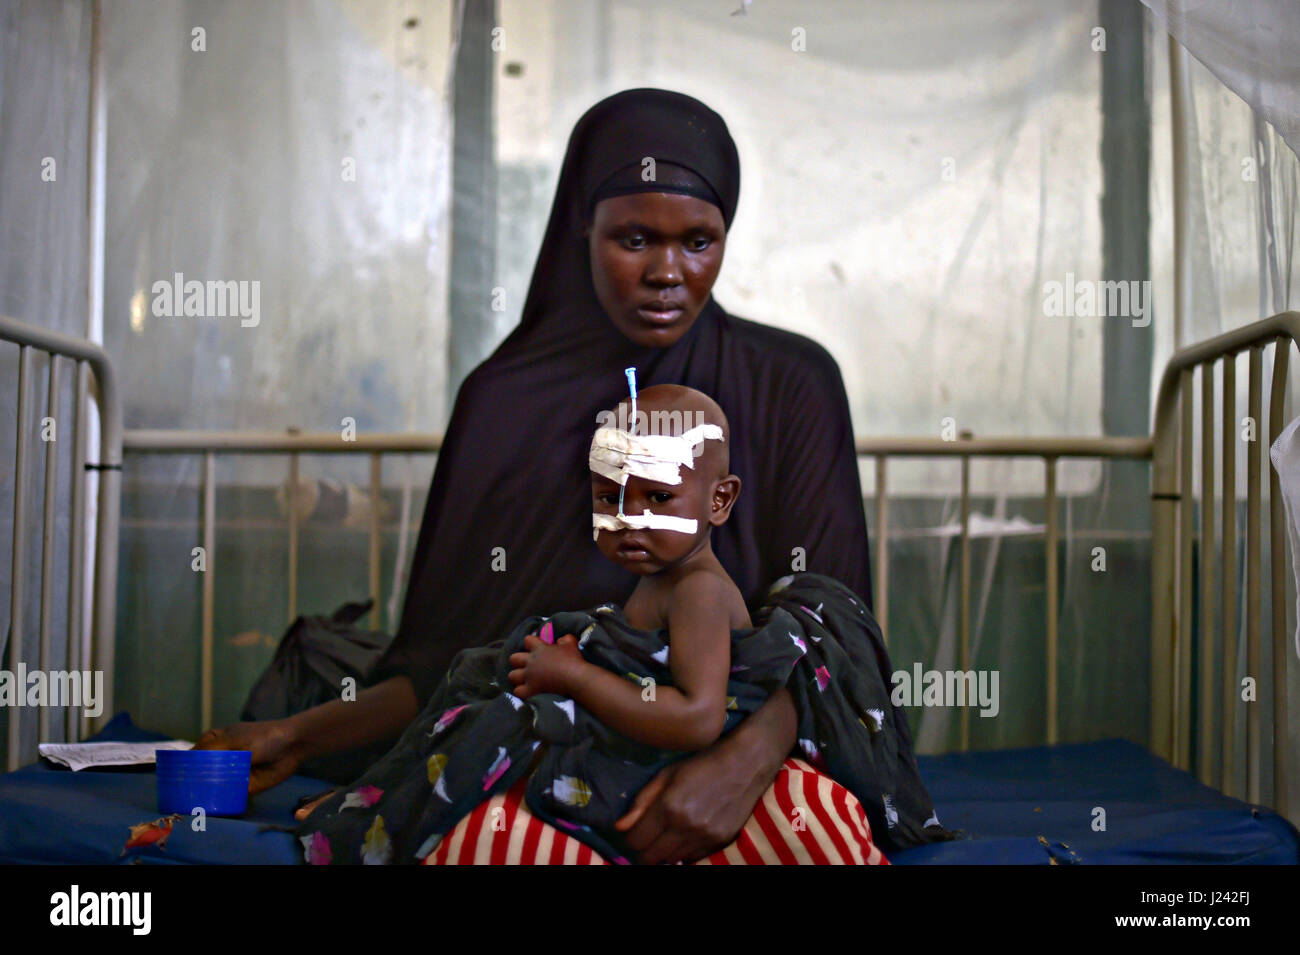 A Somalia women holds her malnourished child fitted with a nasogastric tube inside a ward dedicated for diarrhea patients at the Banadir hospital March 9, 2017 in Mogadishu, Somalia. Somalia is experiencing a severe drought, and may be on the brink of famine unless urgent humanitarian action is taken soon. Stock Photo